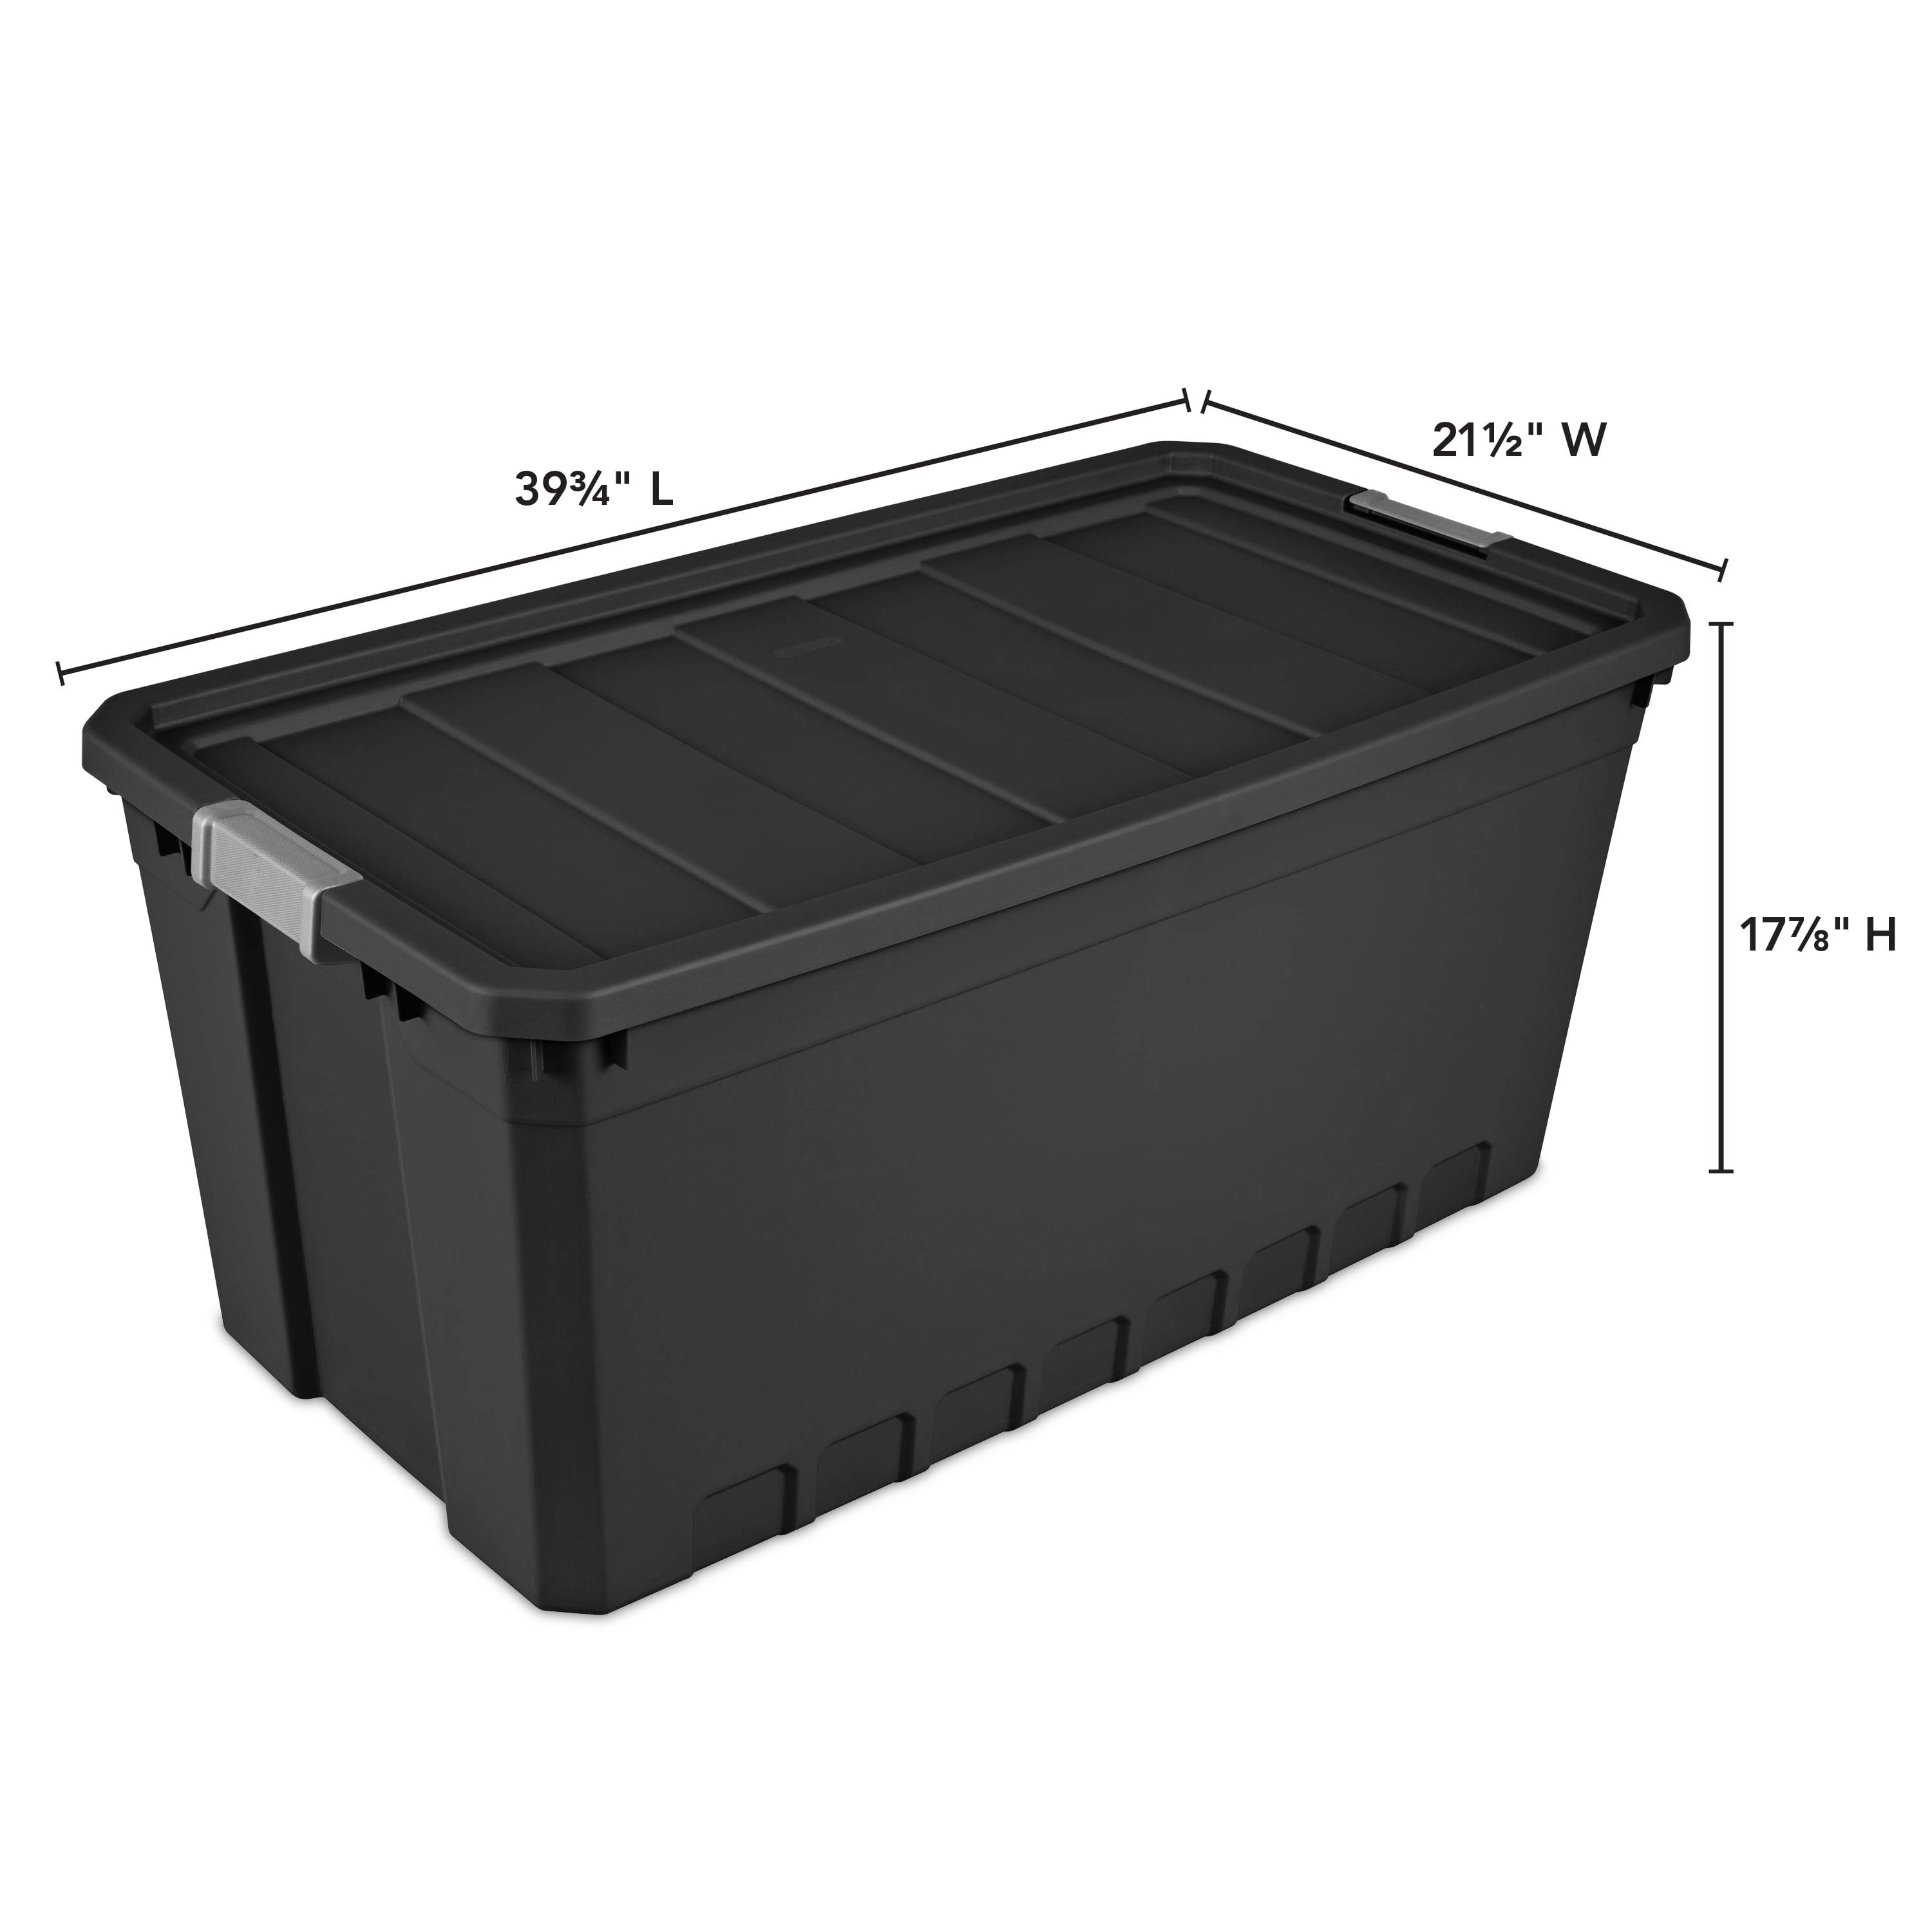 Large Black 50 Gallon Plastic Storage Containers Tote Black Case of 3